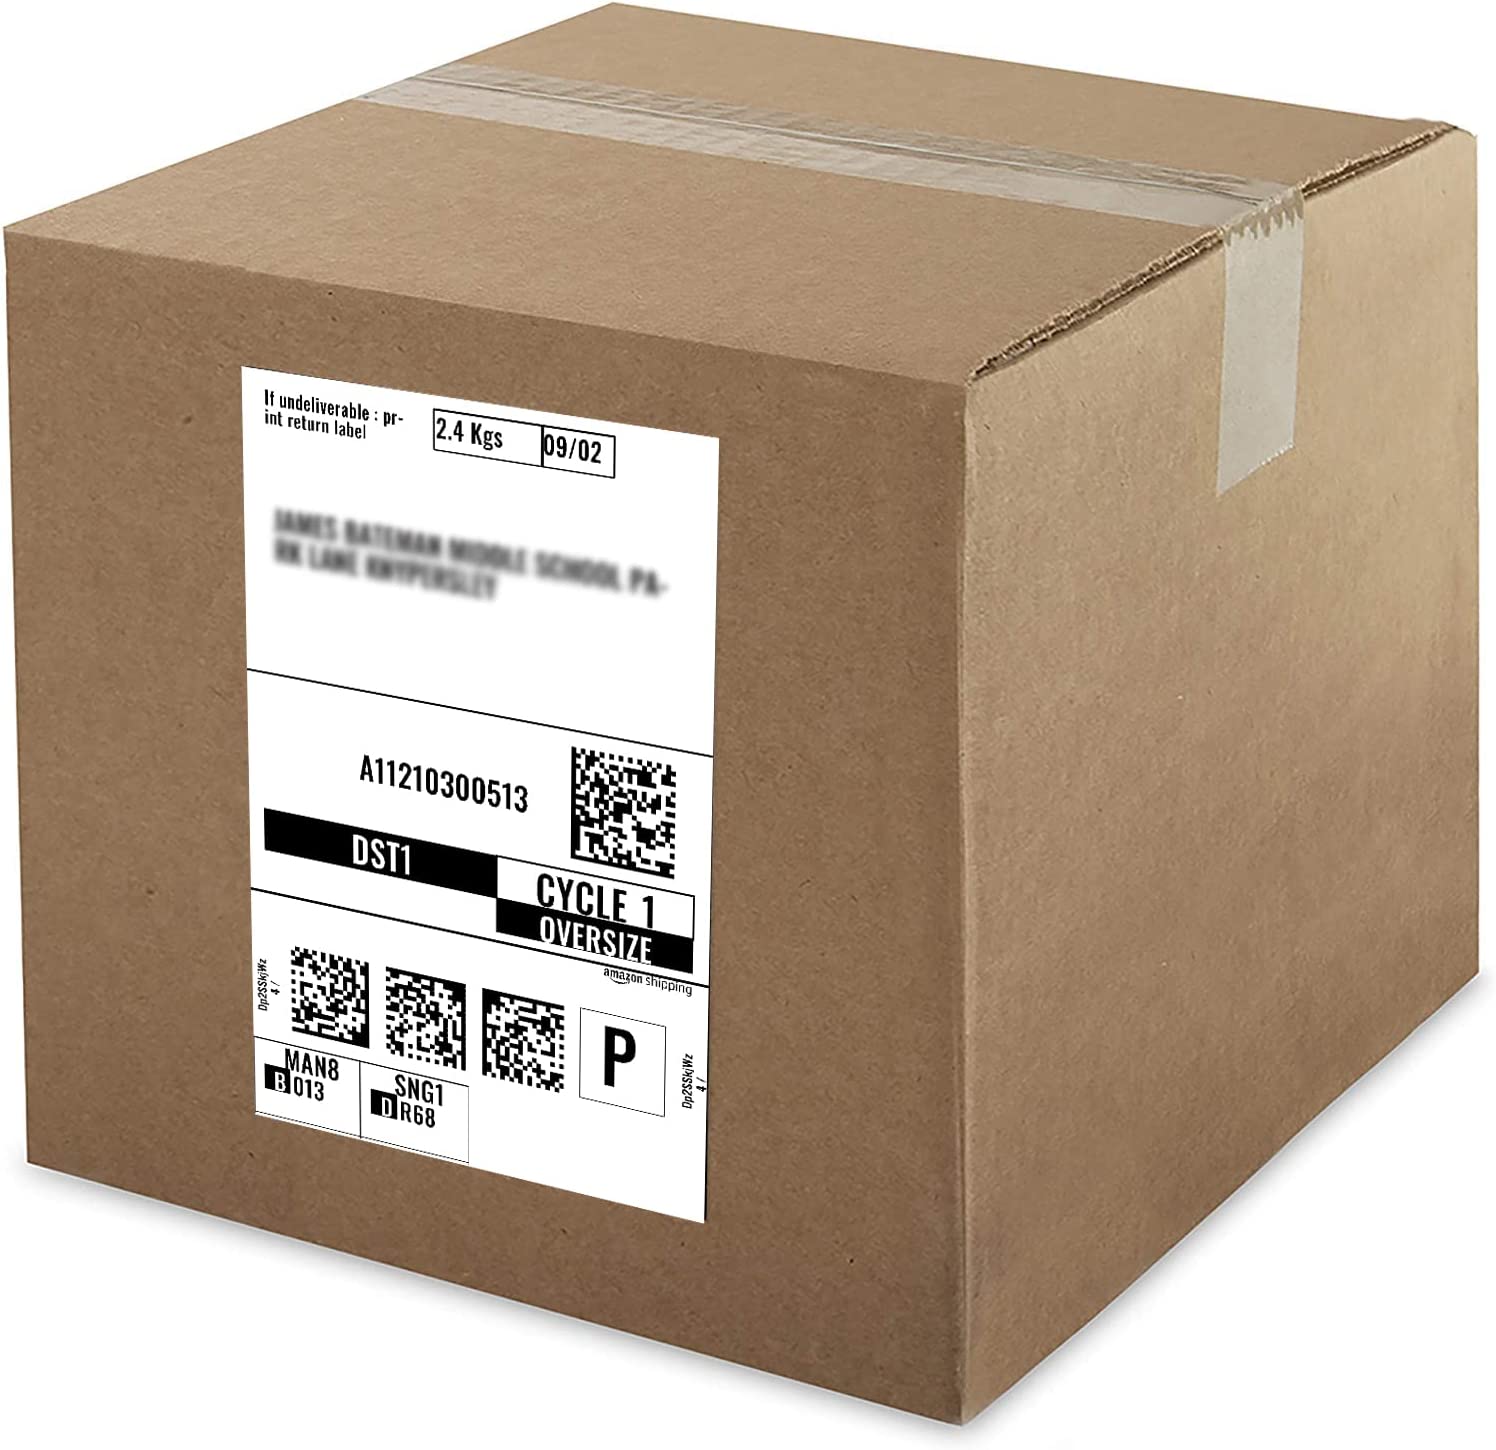 SKY S0904980 104 mm x 159 mm (4' x 6') 220 labels per roll Extra Large Shipping Labels  for Dymo Label Writer 4XL & 5XL